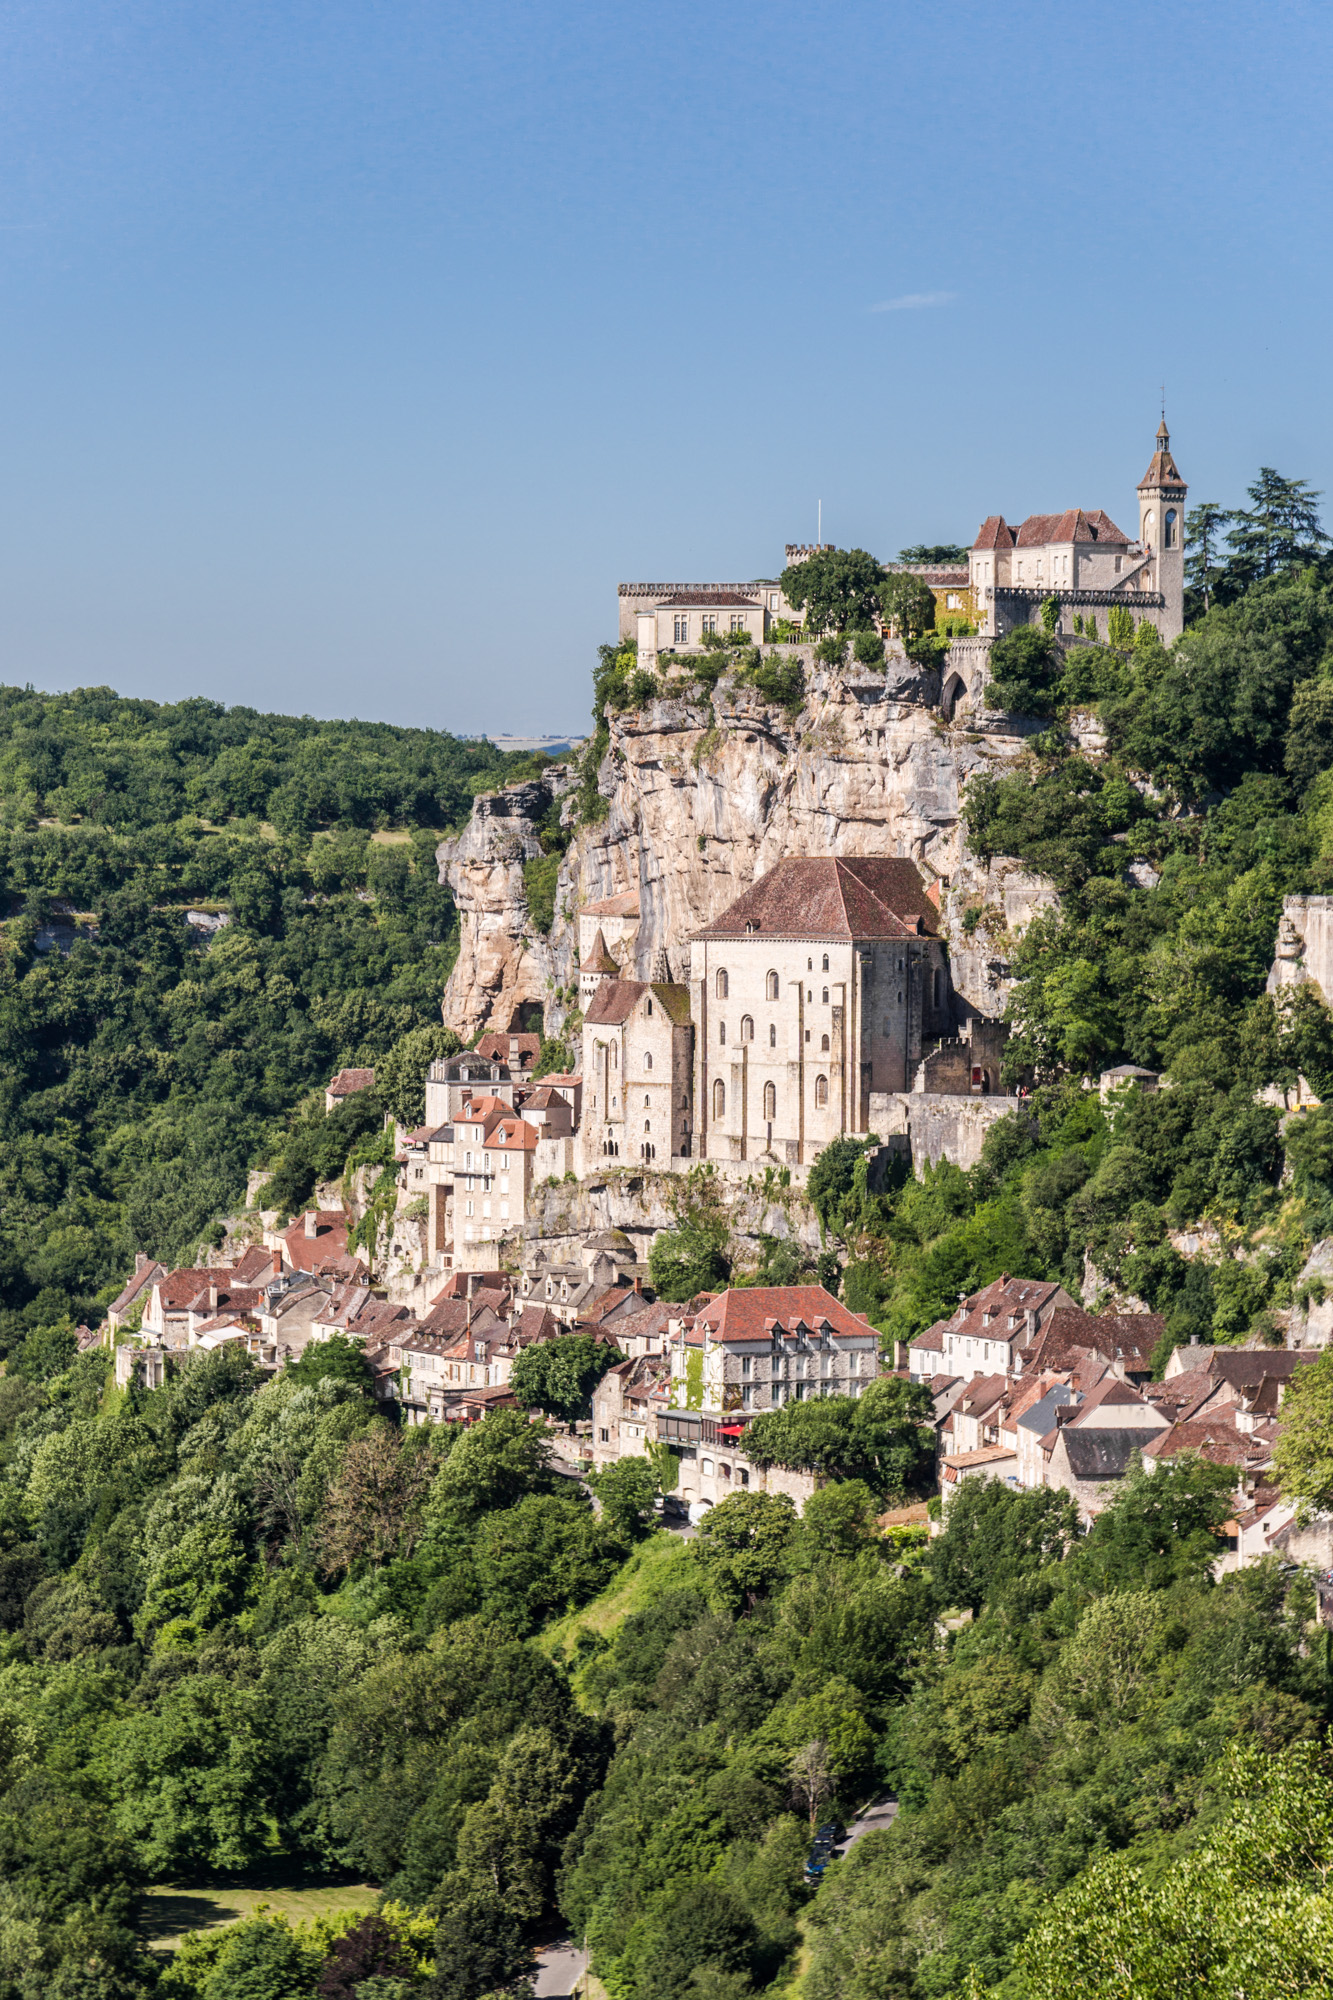 France/Italy roadtrip – Rocamadour and Bouzies